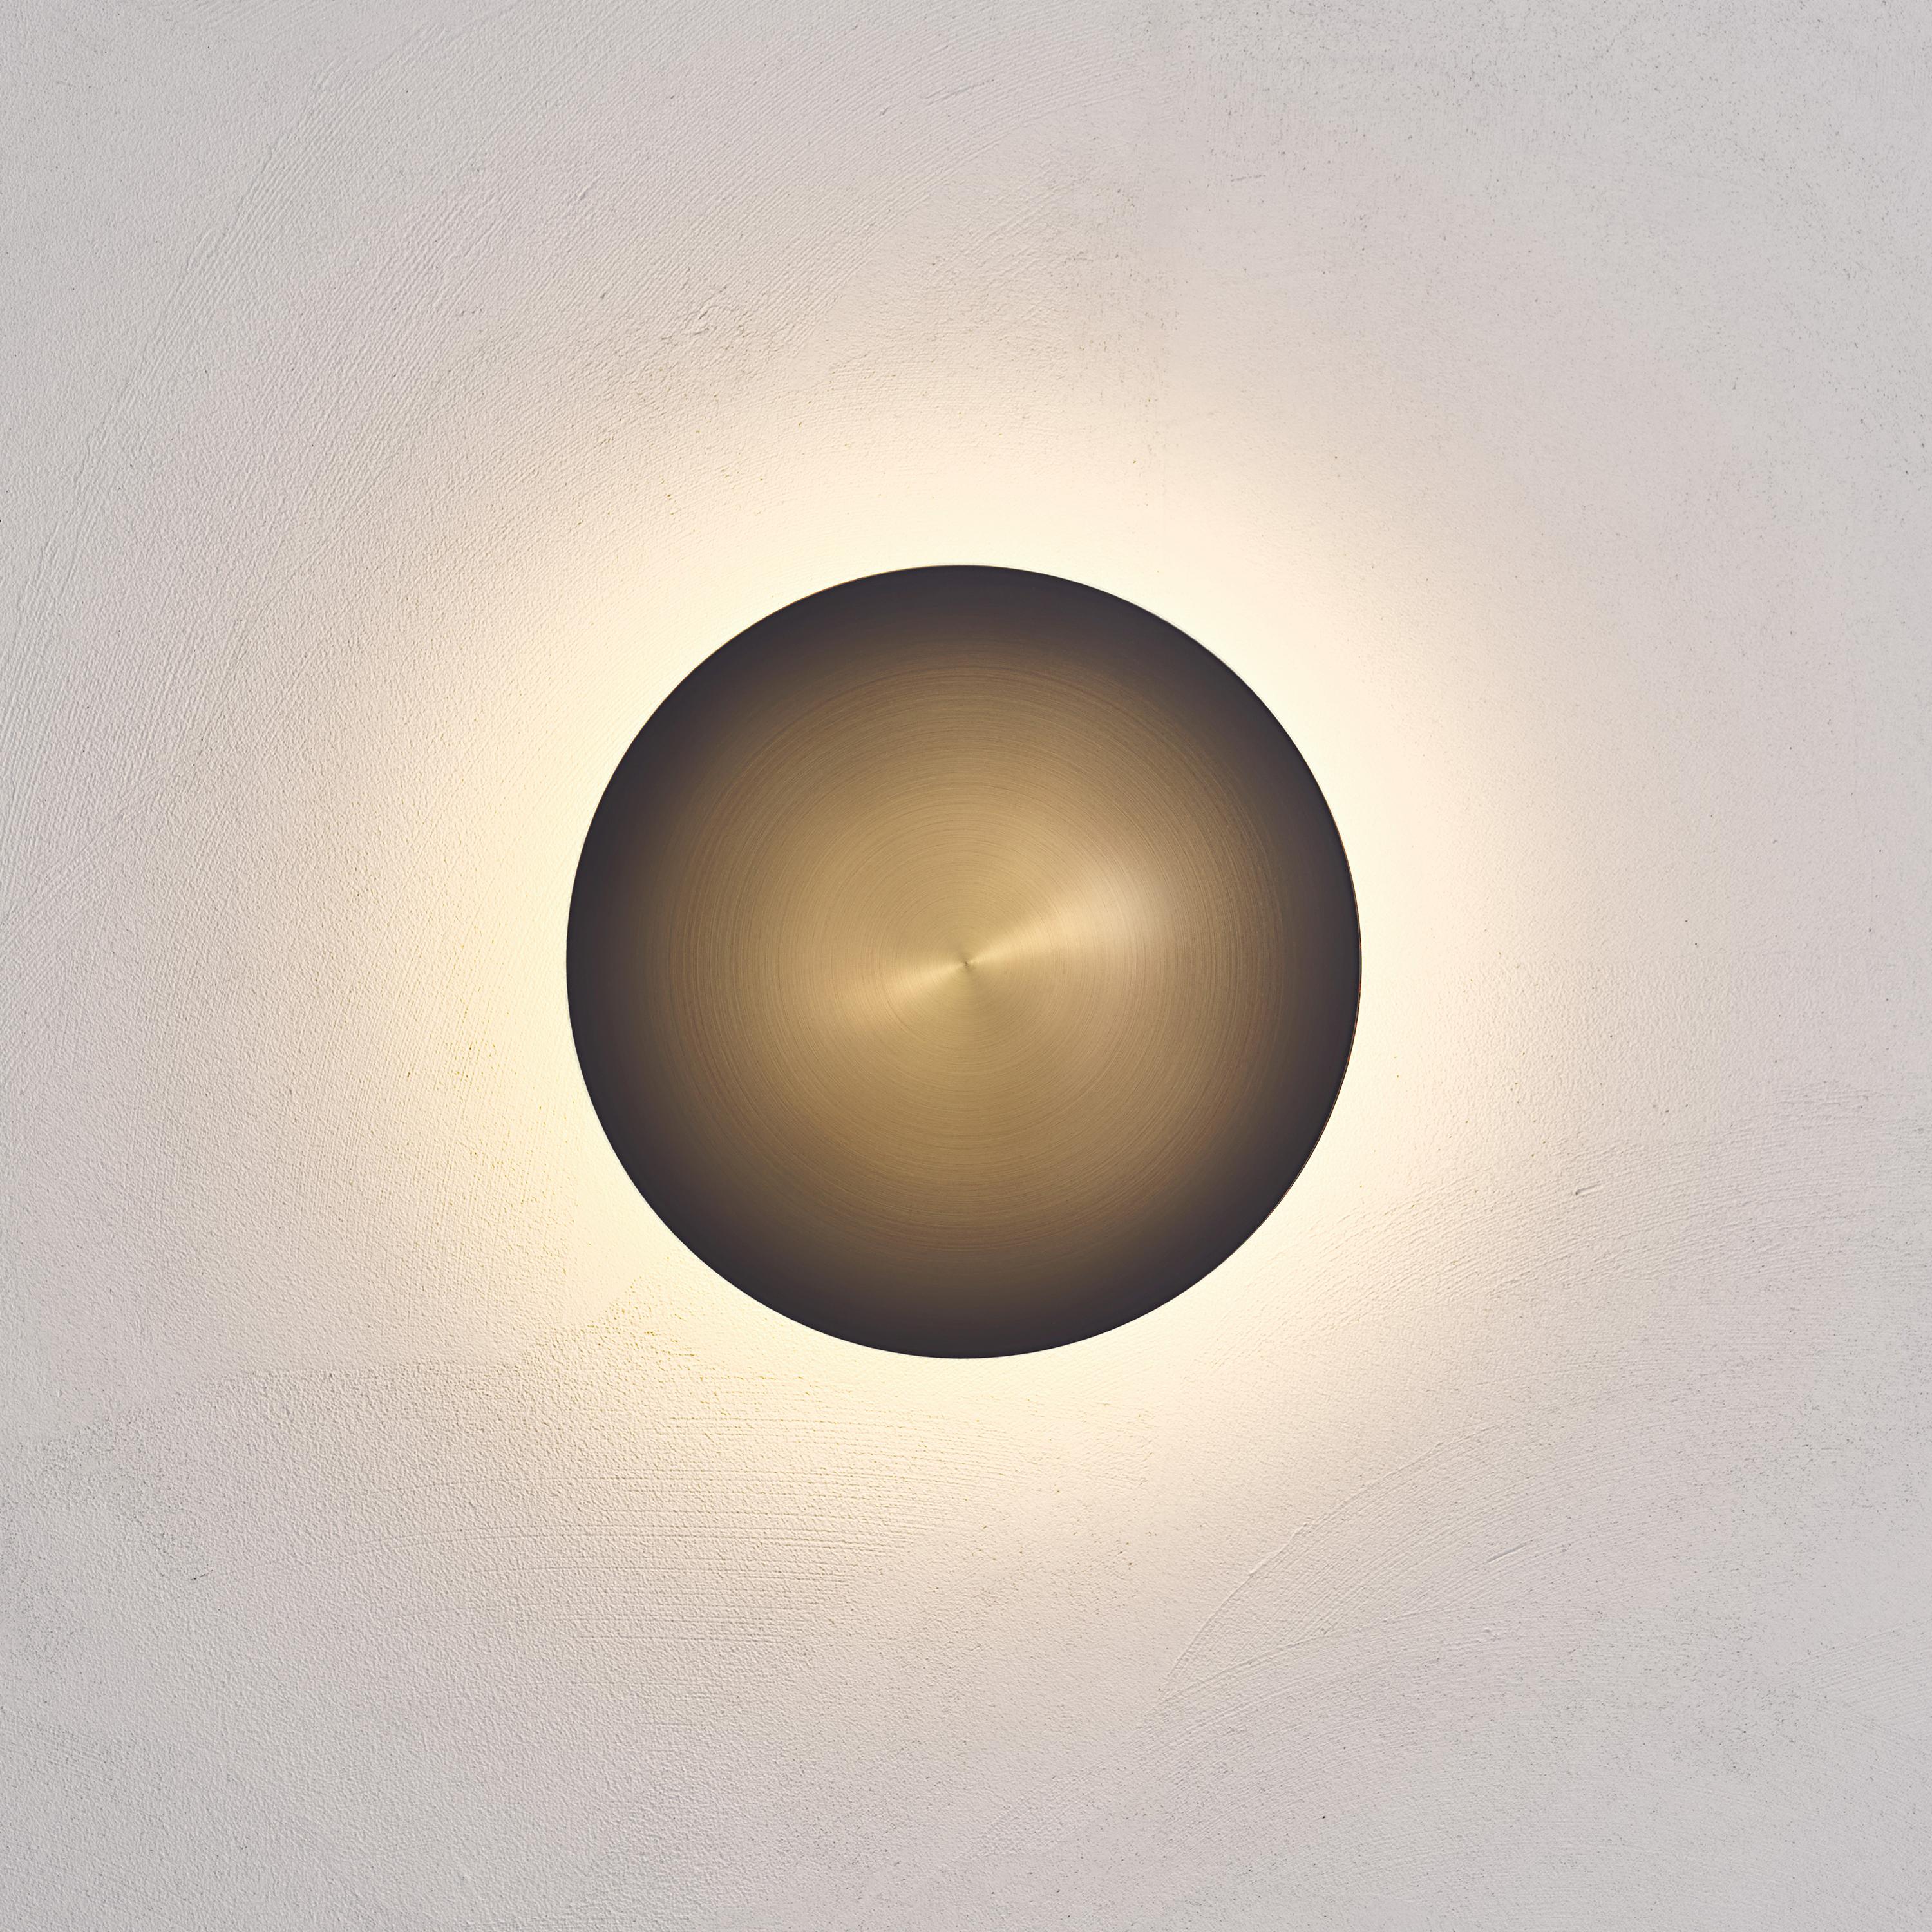 Cosmic 'Comet Ore 20' bronze gradient patinated brass wall light, sconce

Named after the astronomical object that signals a rebirth and new ideas, the ‘Comet’ pieces are achieved with skillful brass shaping and patina finishes that celebrate